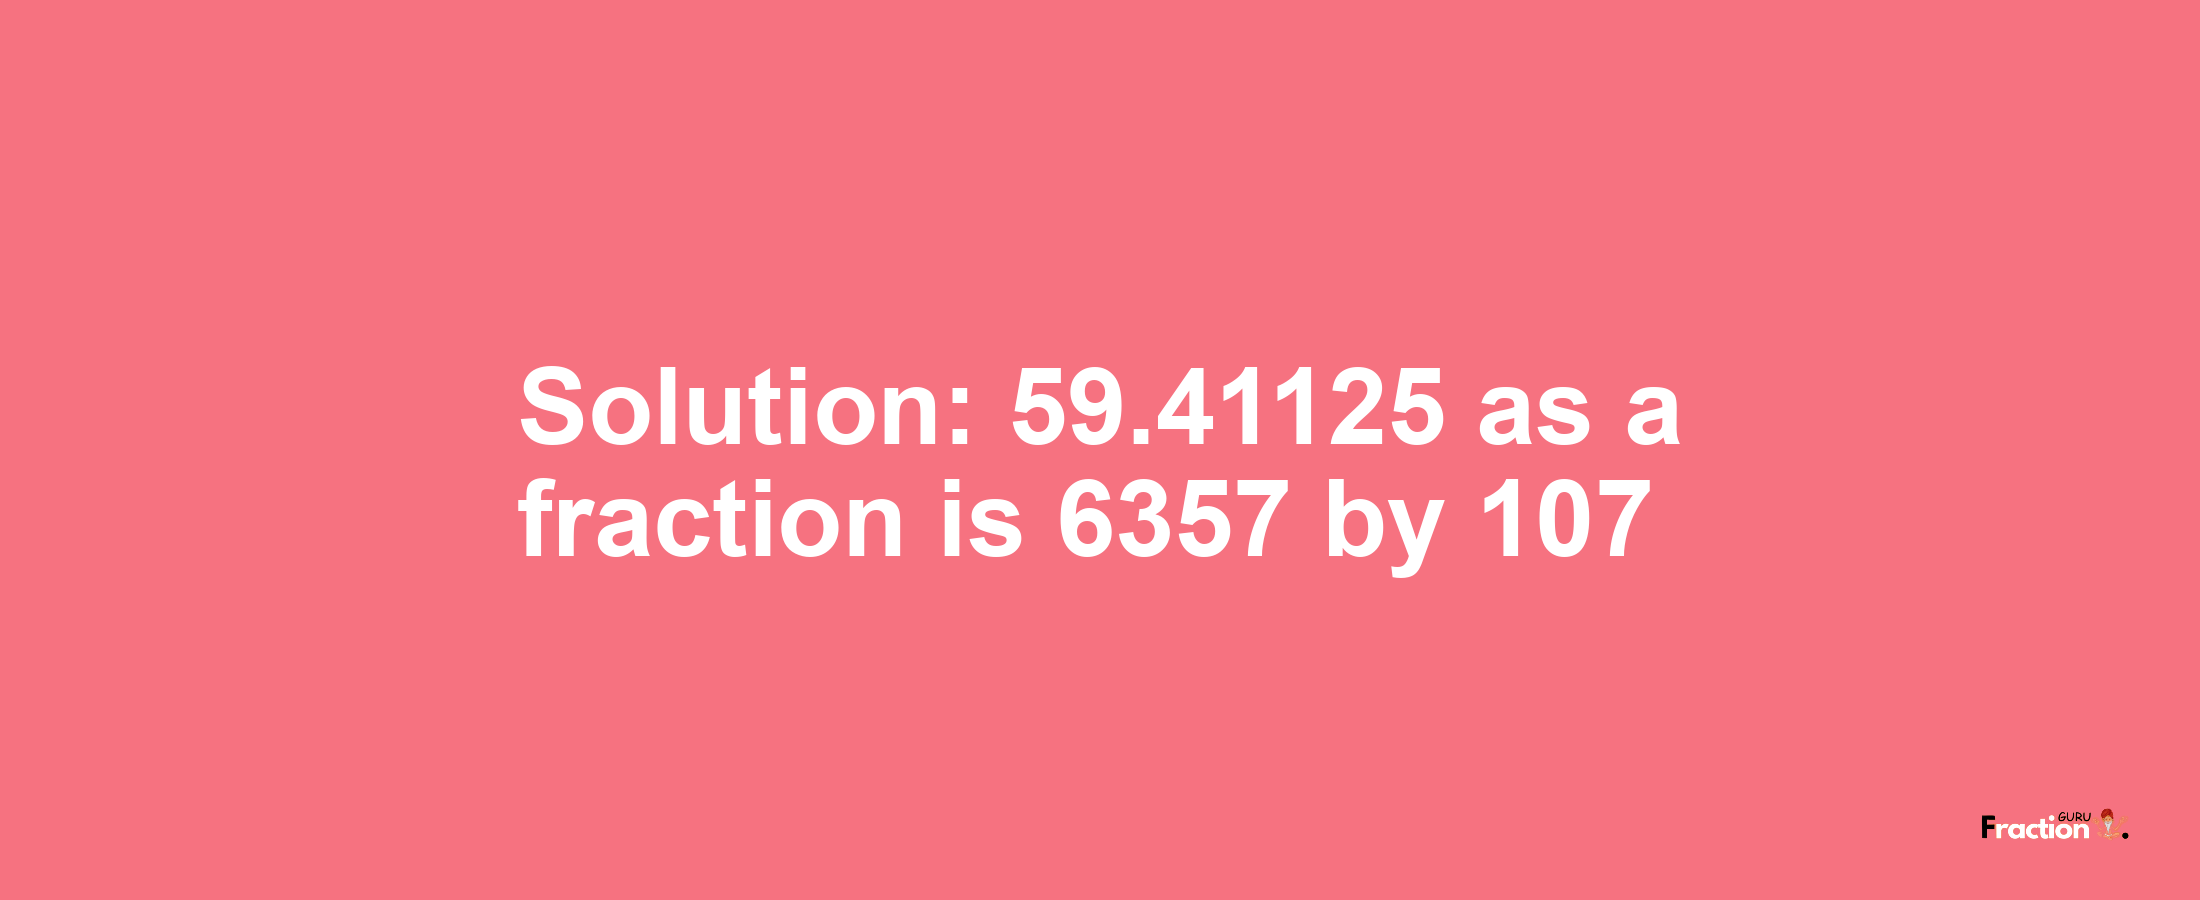 Solution:59.41125 as a fraction is 6357/107